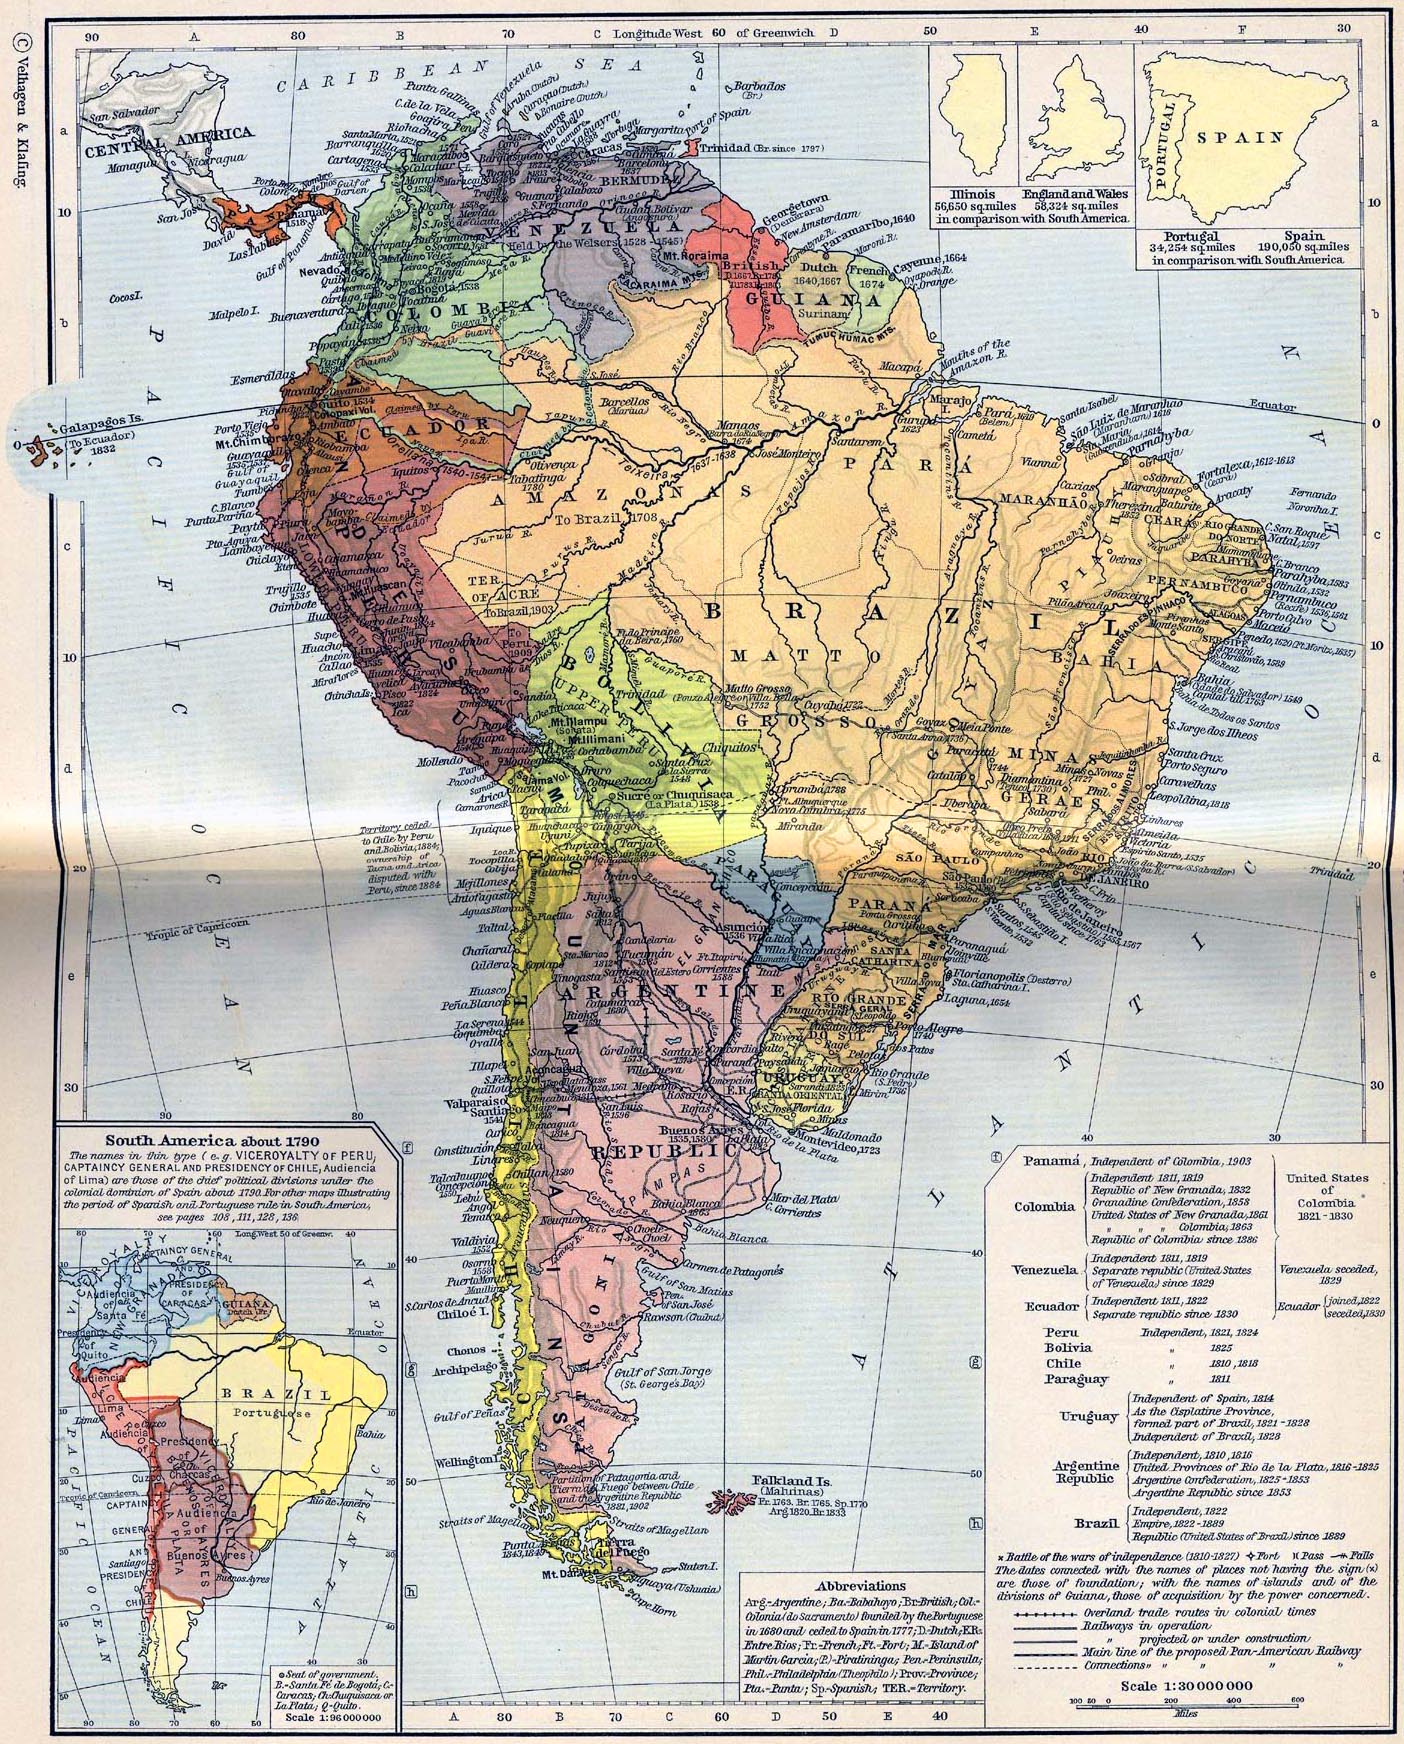 Map of South America. Inset: South America about 1790.